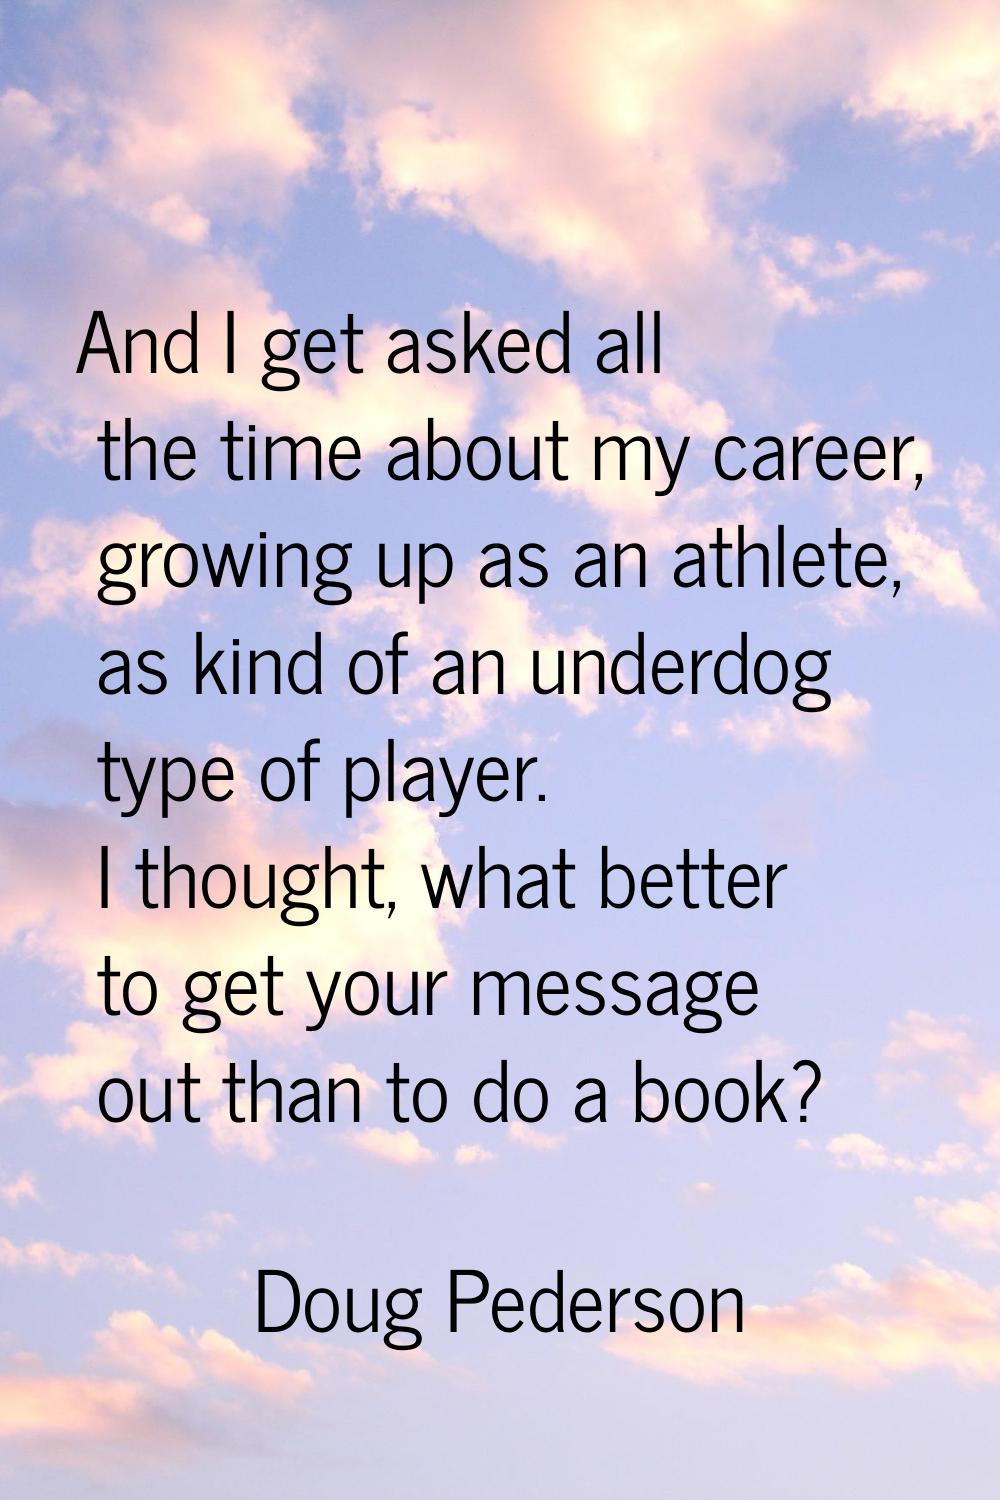 And I get asked all the time about my career, growing up as an athlete, as kind of an underdog type